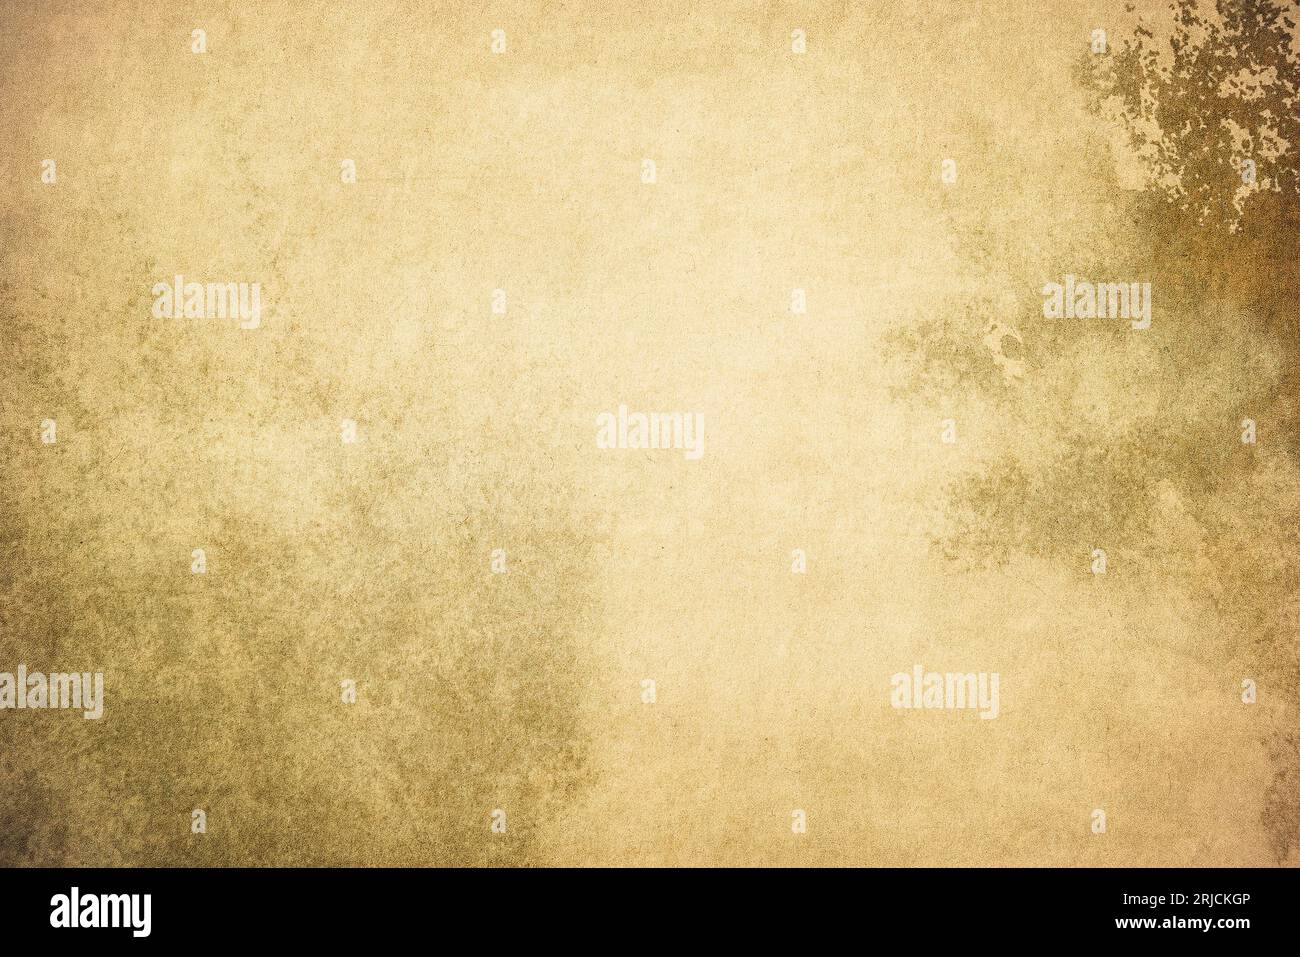 Old paper texture background. Nice vintage background. Stock Photo